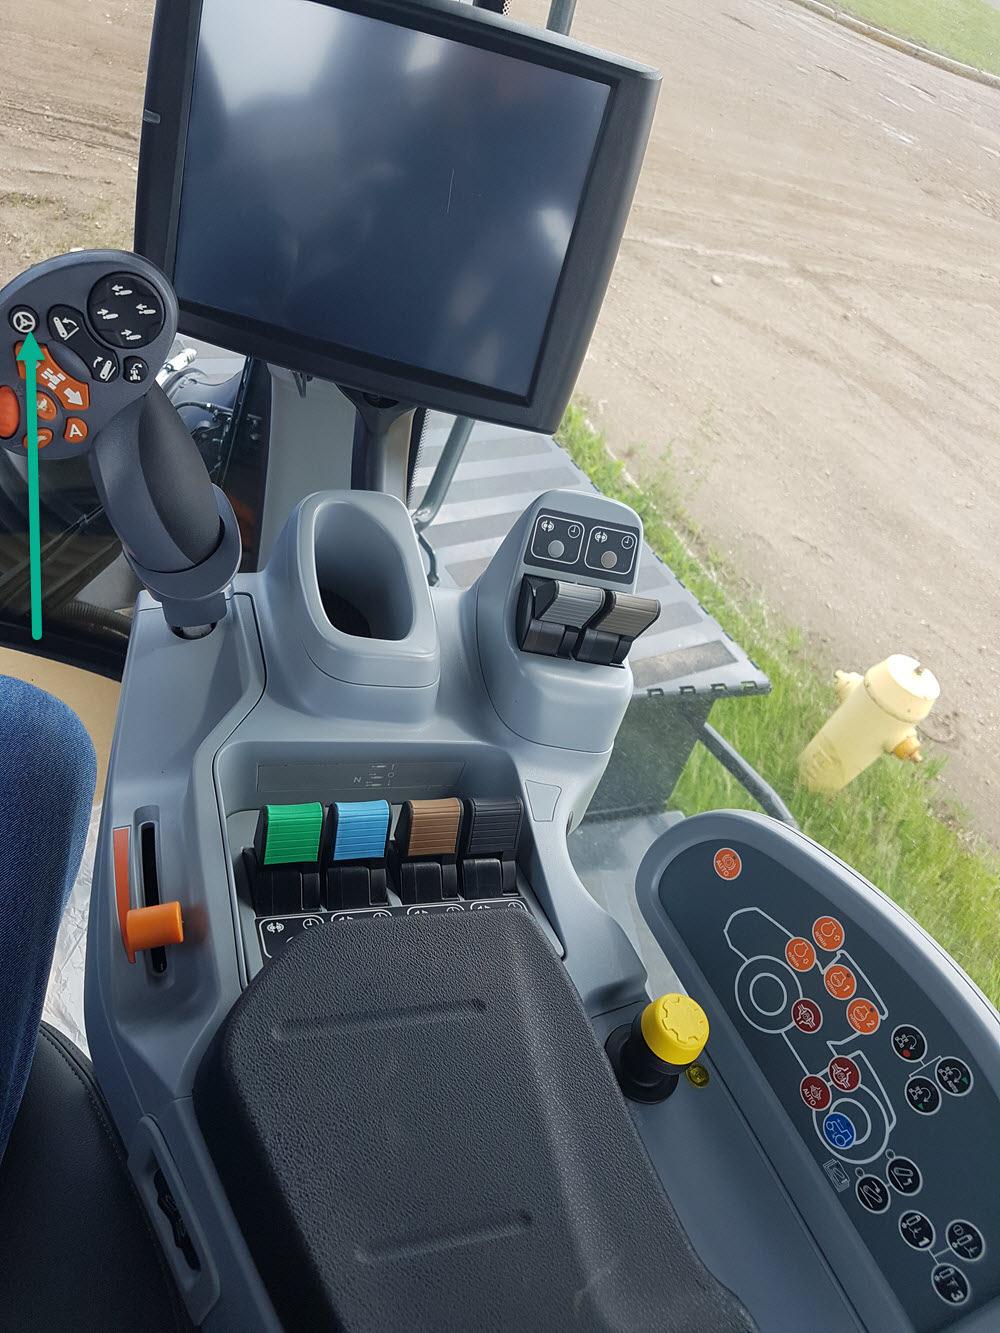 ! Use the John Deere monitor as you do in a John Deere tractor, set an AB-line, activate "Steer ON", then use the build-in resume button